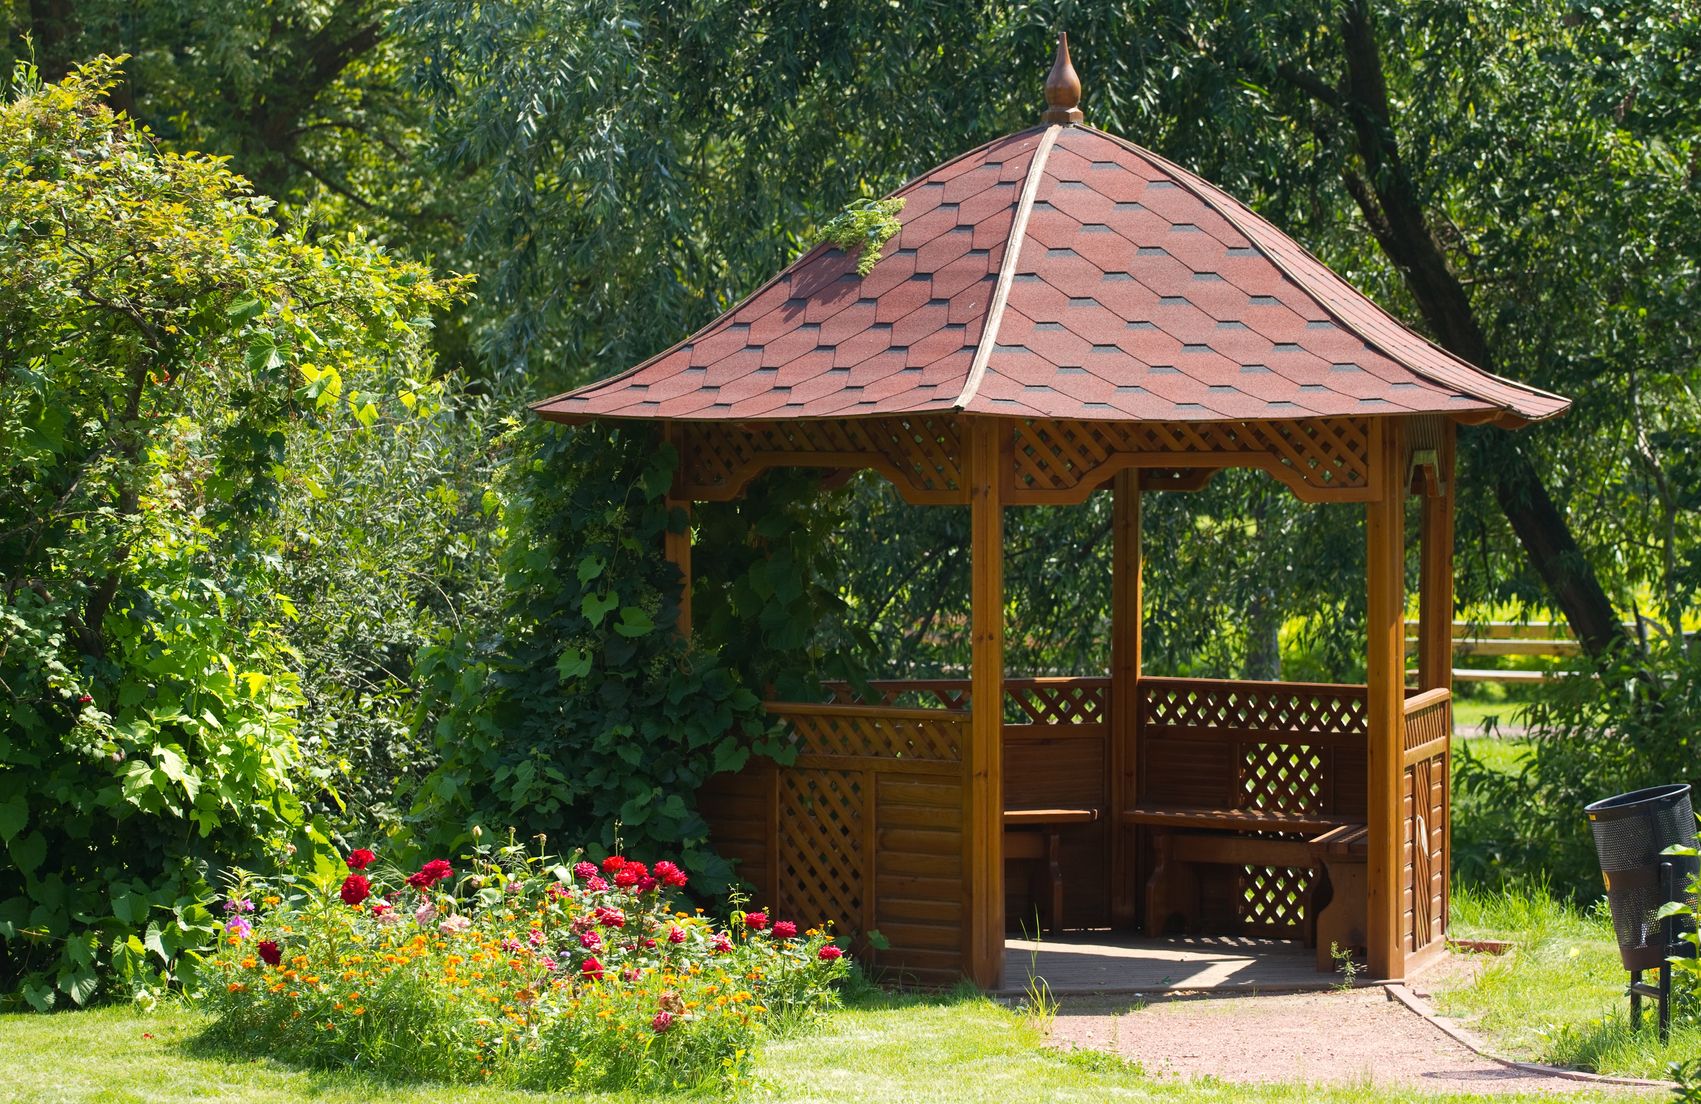 Where to Buy Your Next Garden Building - In Store or Online?